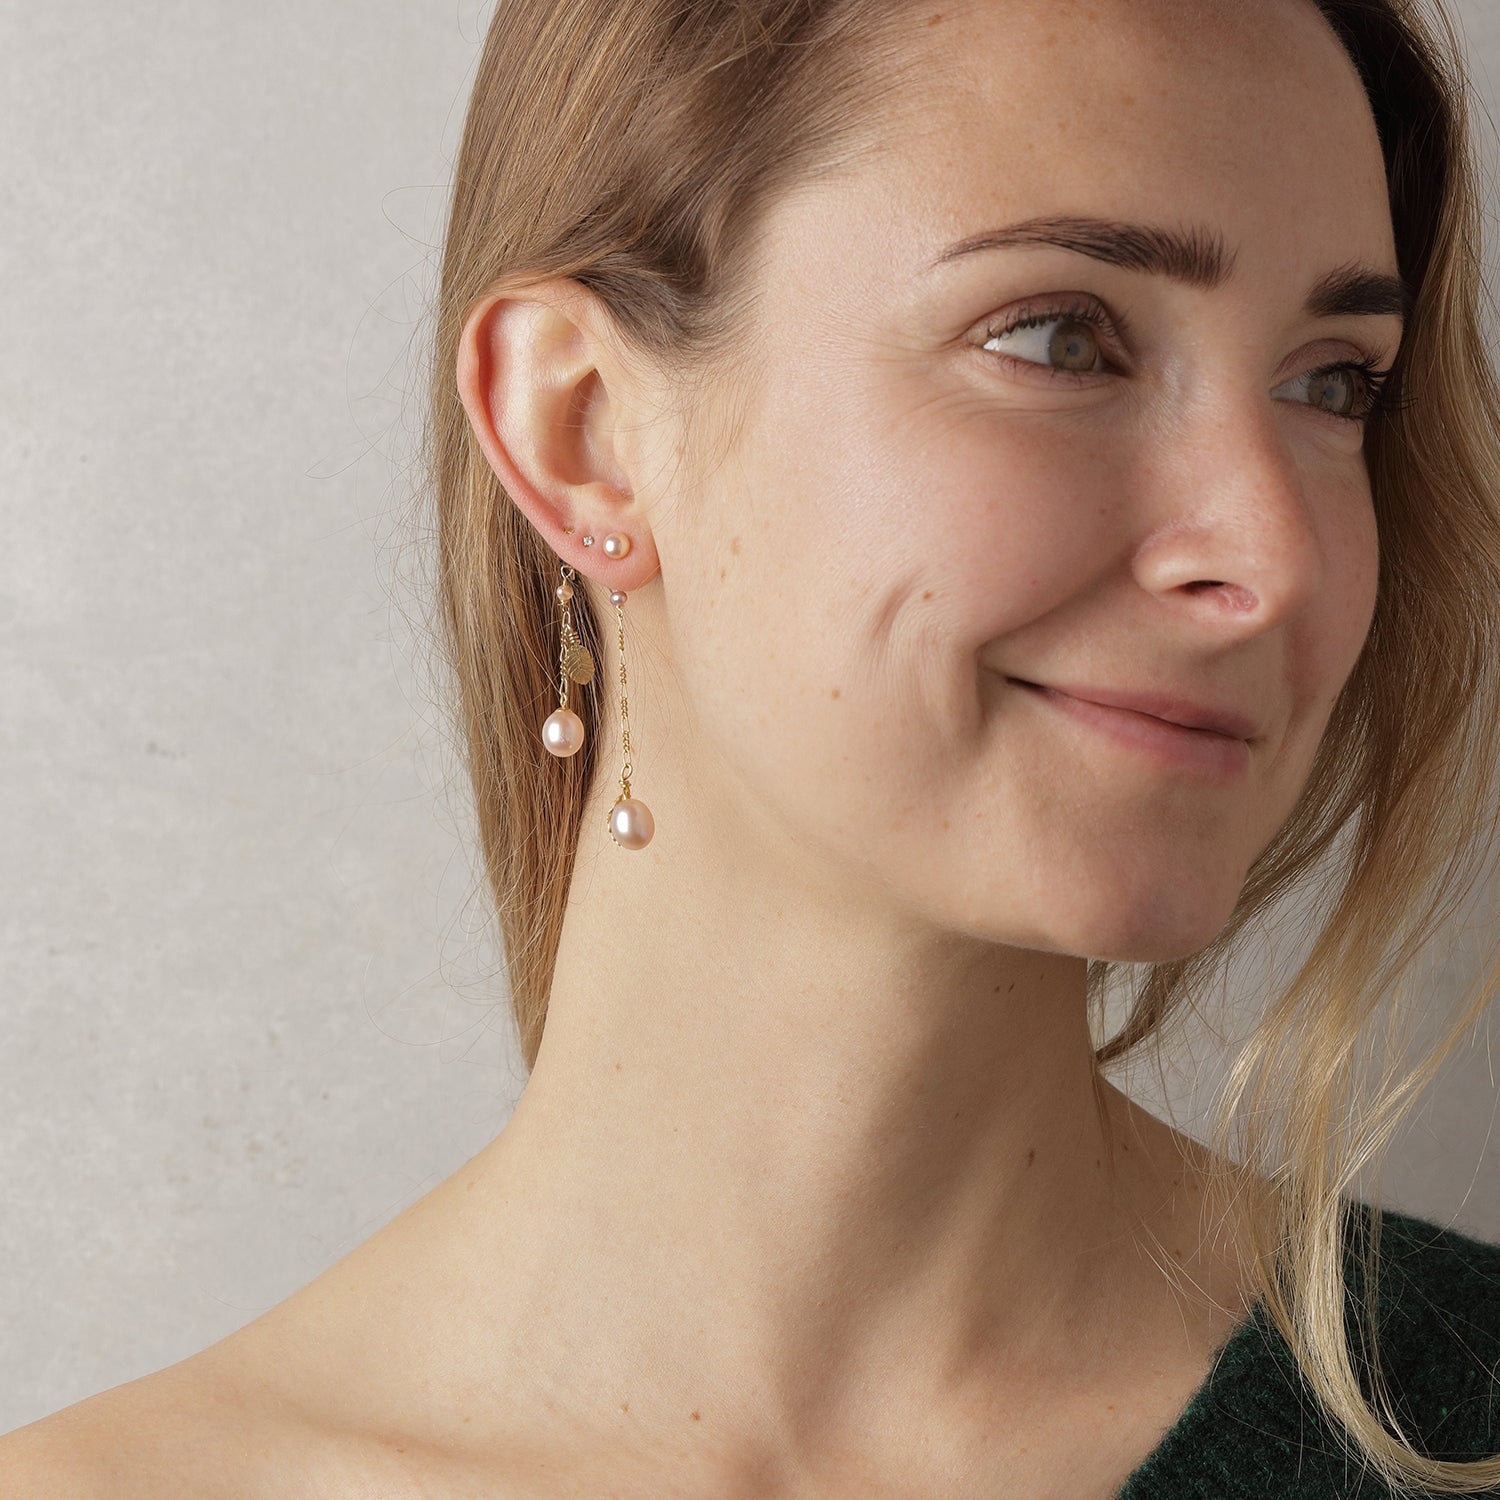 Jewellery for Work: How to Style Pearls for the Office